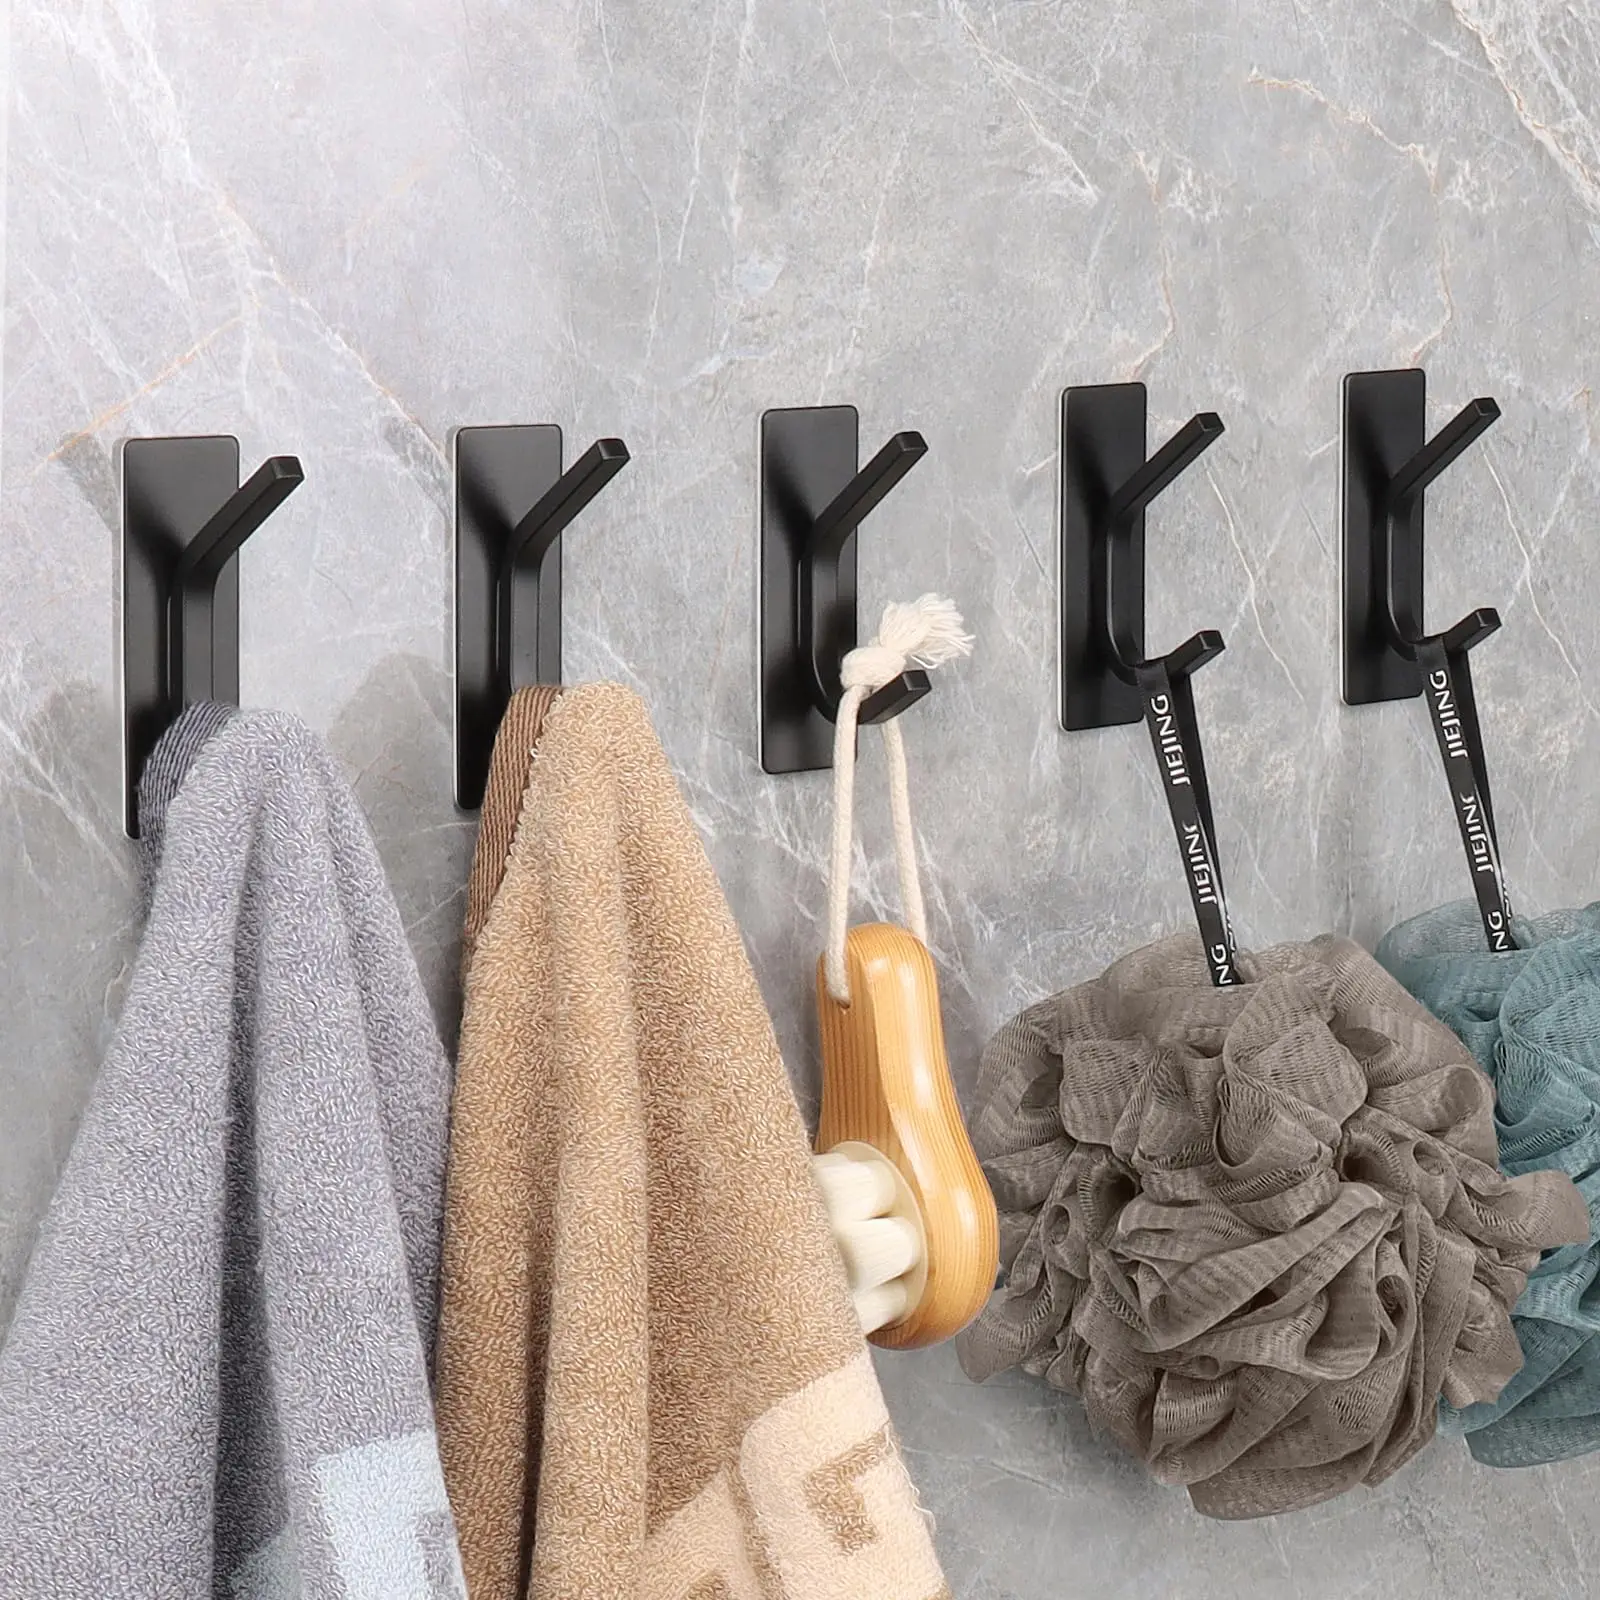 Adhesive Hooks Stainless Steel Bath Towel Holders No Drilling Rustproof Wall  Hooks for Coat Bag Key Hat Stick on Wall Robe - AliExpress